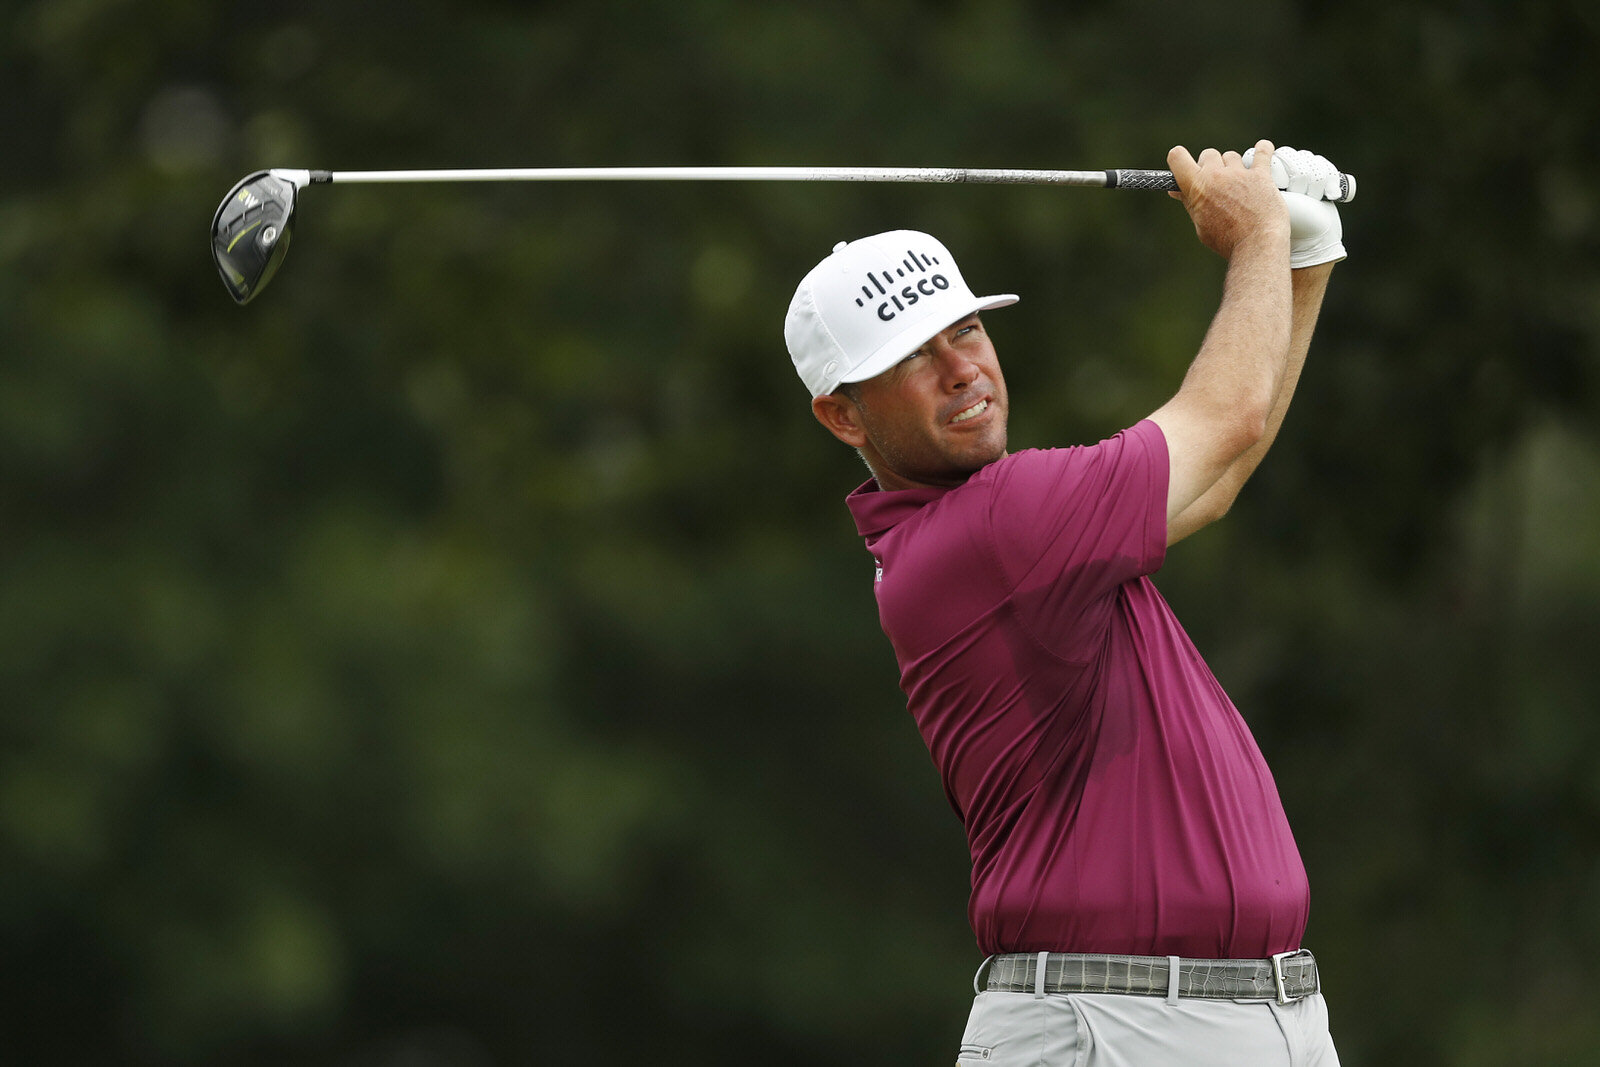  MEMPHIS, TENNESSEE - JULY 31: Chez Reavie of the United States plays his shot from the 13th tee during the second round of the World Golf Championship-FedEx St Jude Invitational at TPC Southwind on July 31, 2020 in Memphis, Tennessee. (Photo by Mich